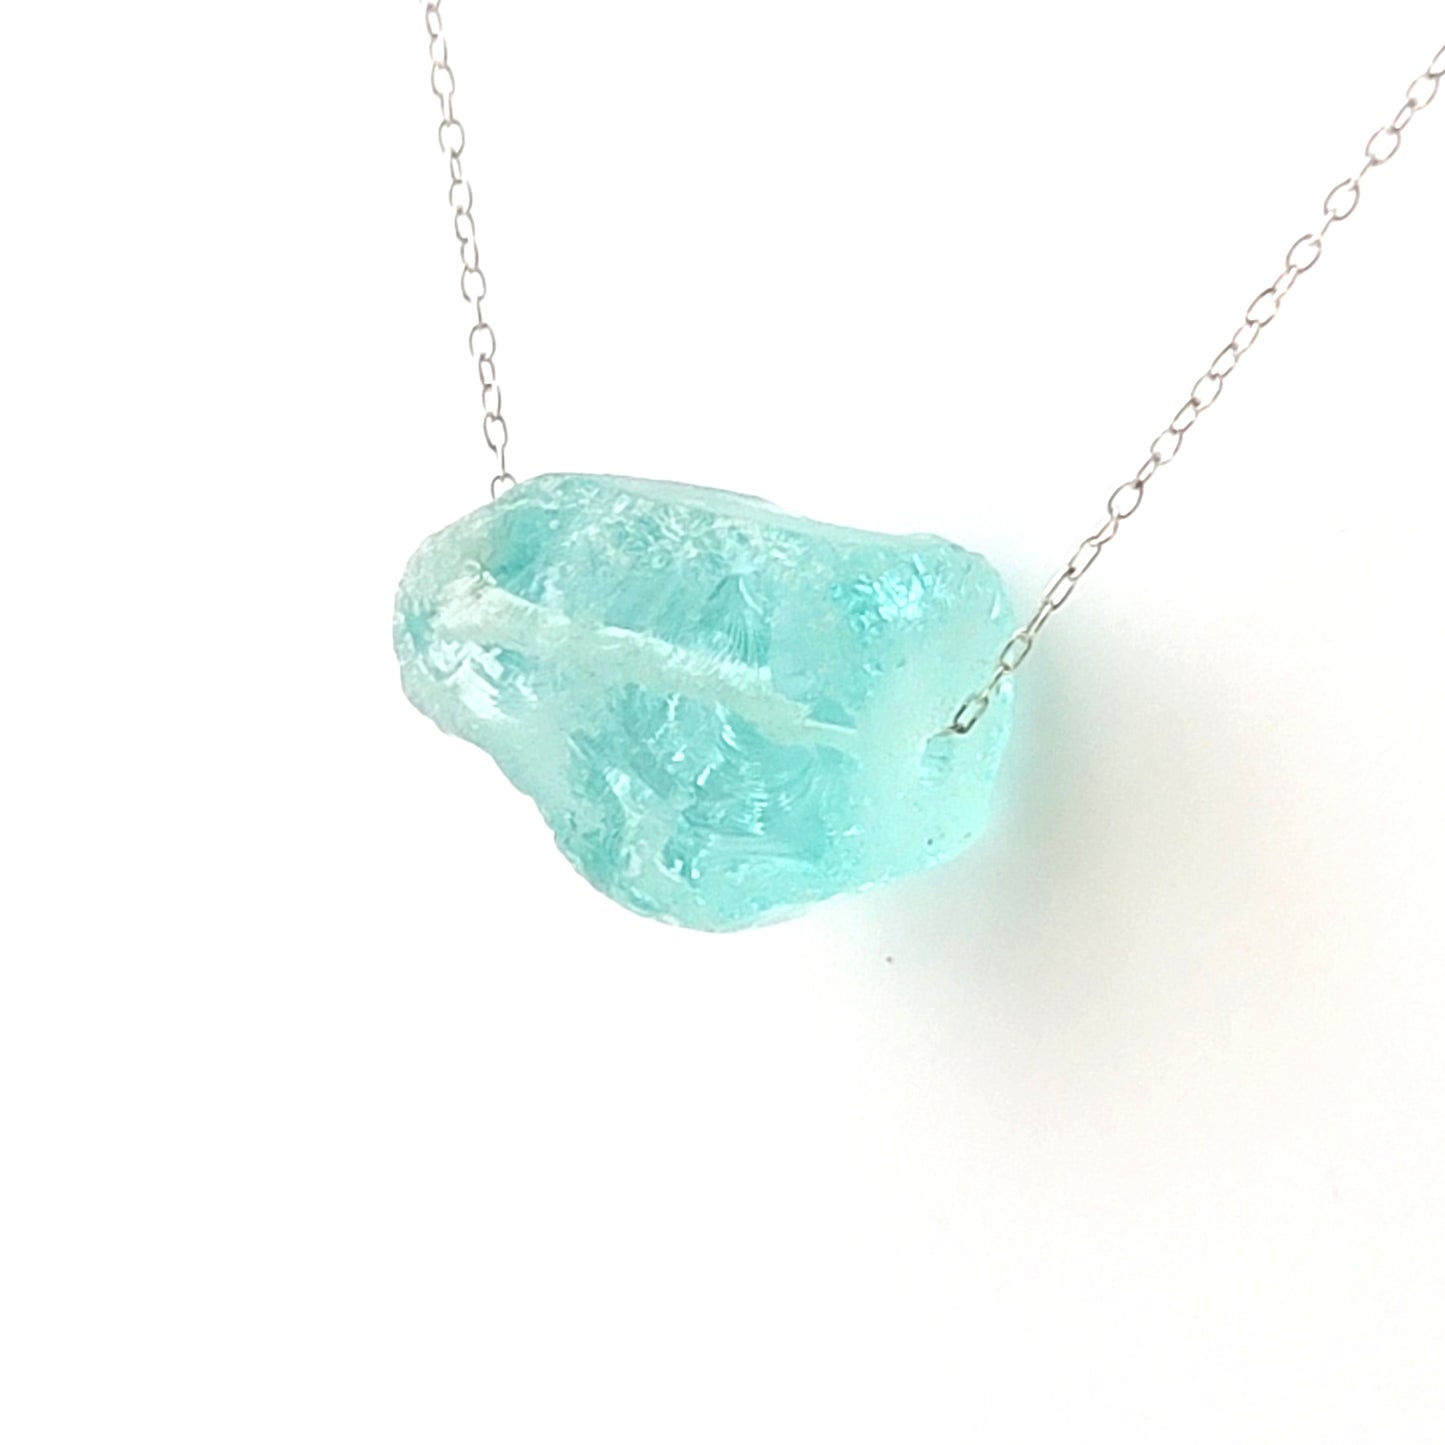 Aqua Quartz Crystal Nugget Minimalist Necklace, a rough Blue Quartz nugget on an Upcycled Vintage Sterling Silver chain, on white background